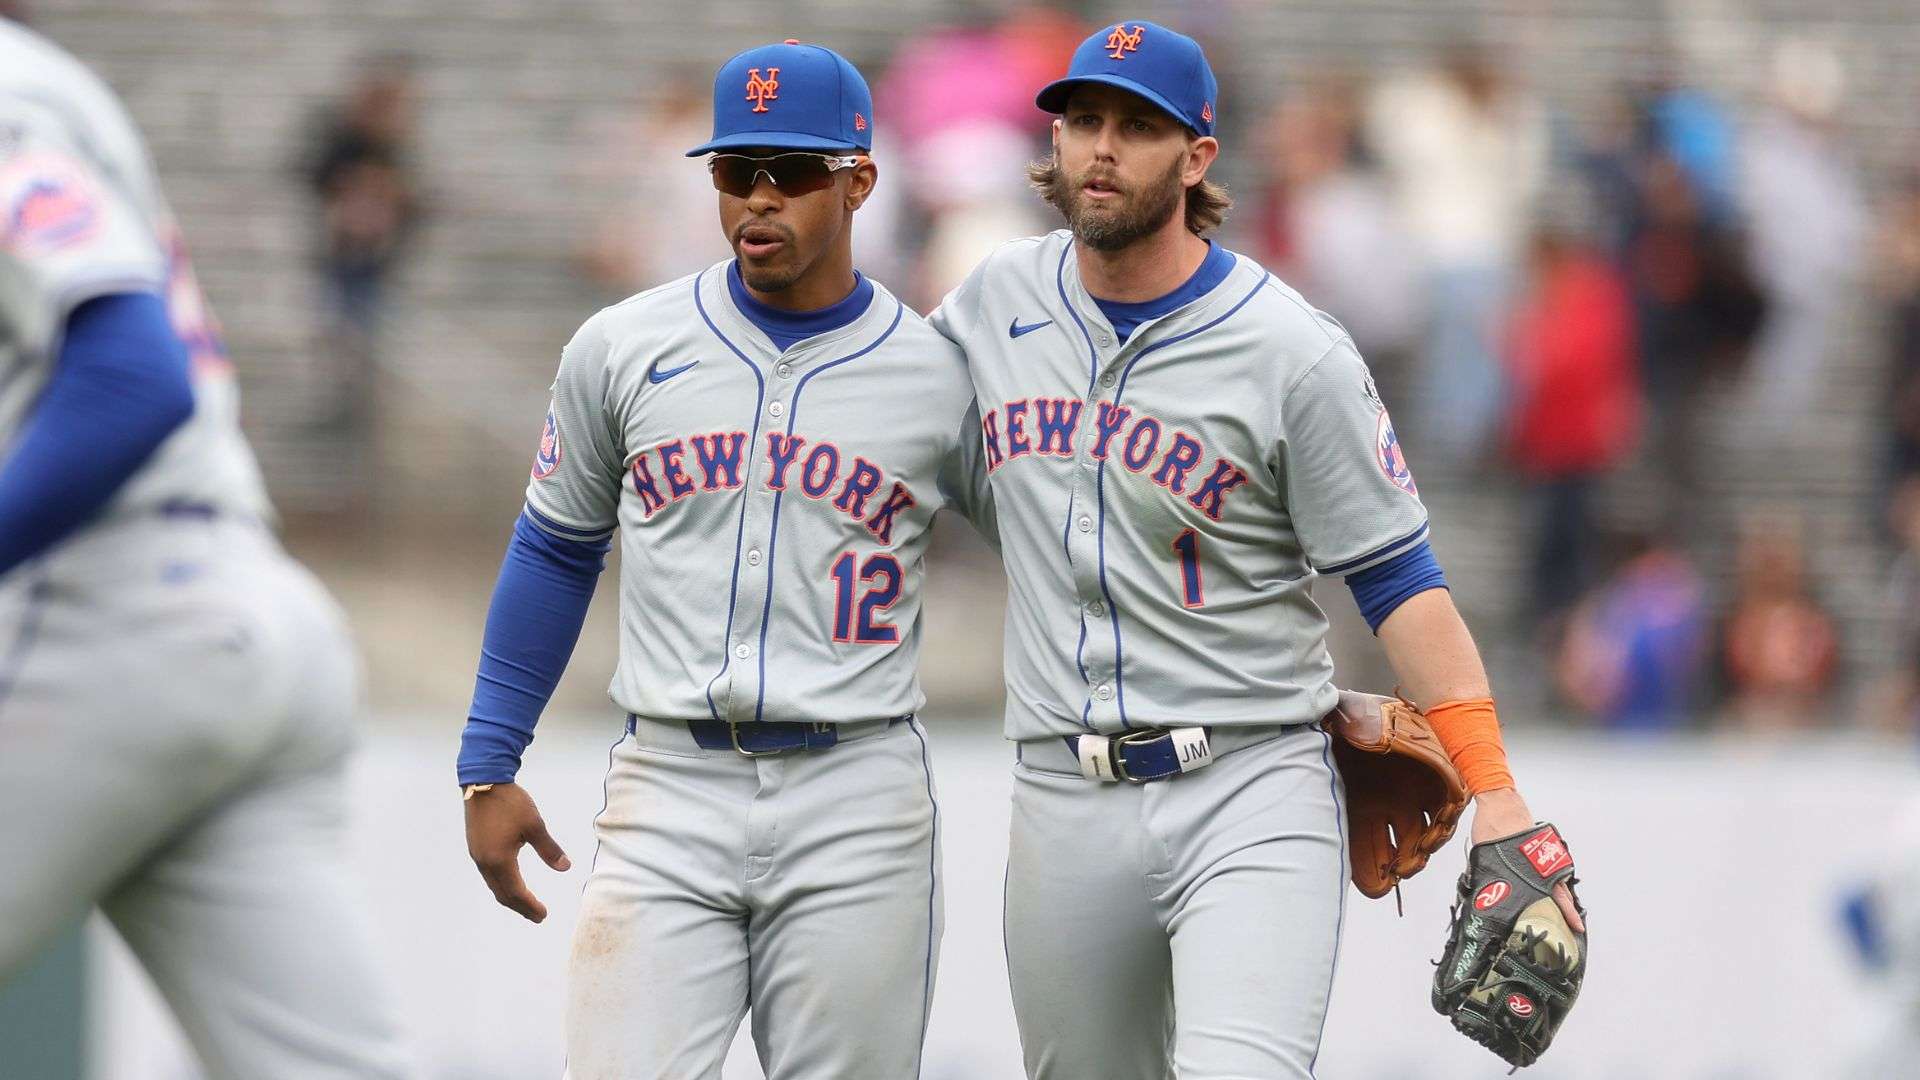  Francisco Lindor #12 and Jeff McNeil #1 of the New York Mets 